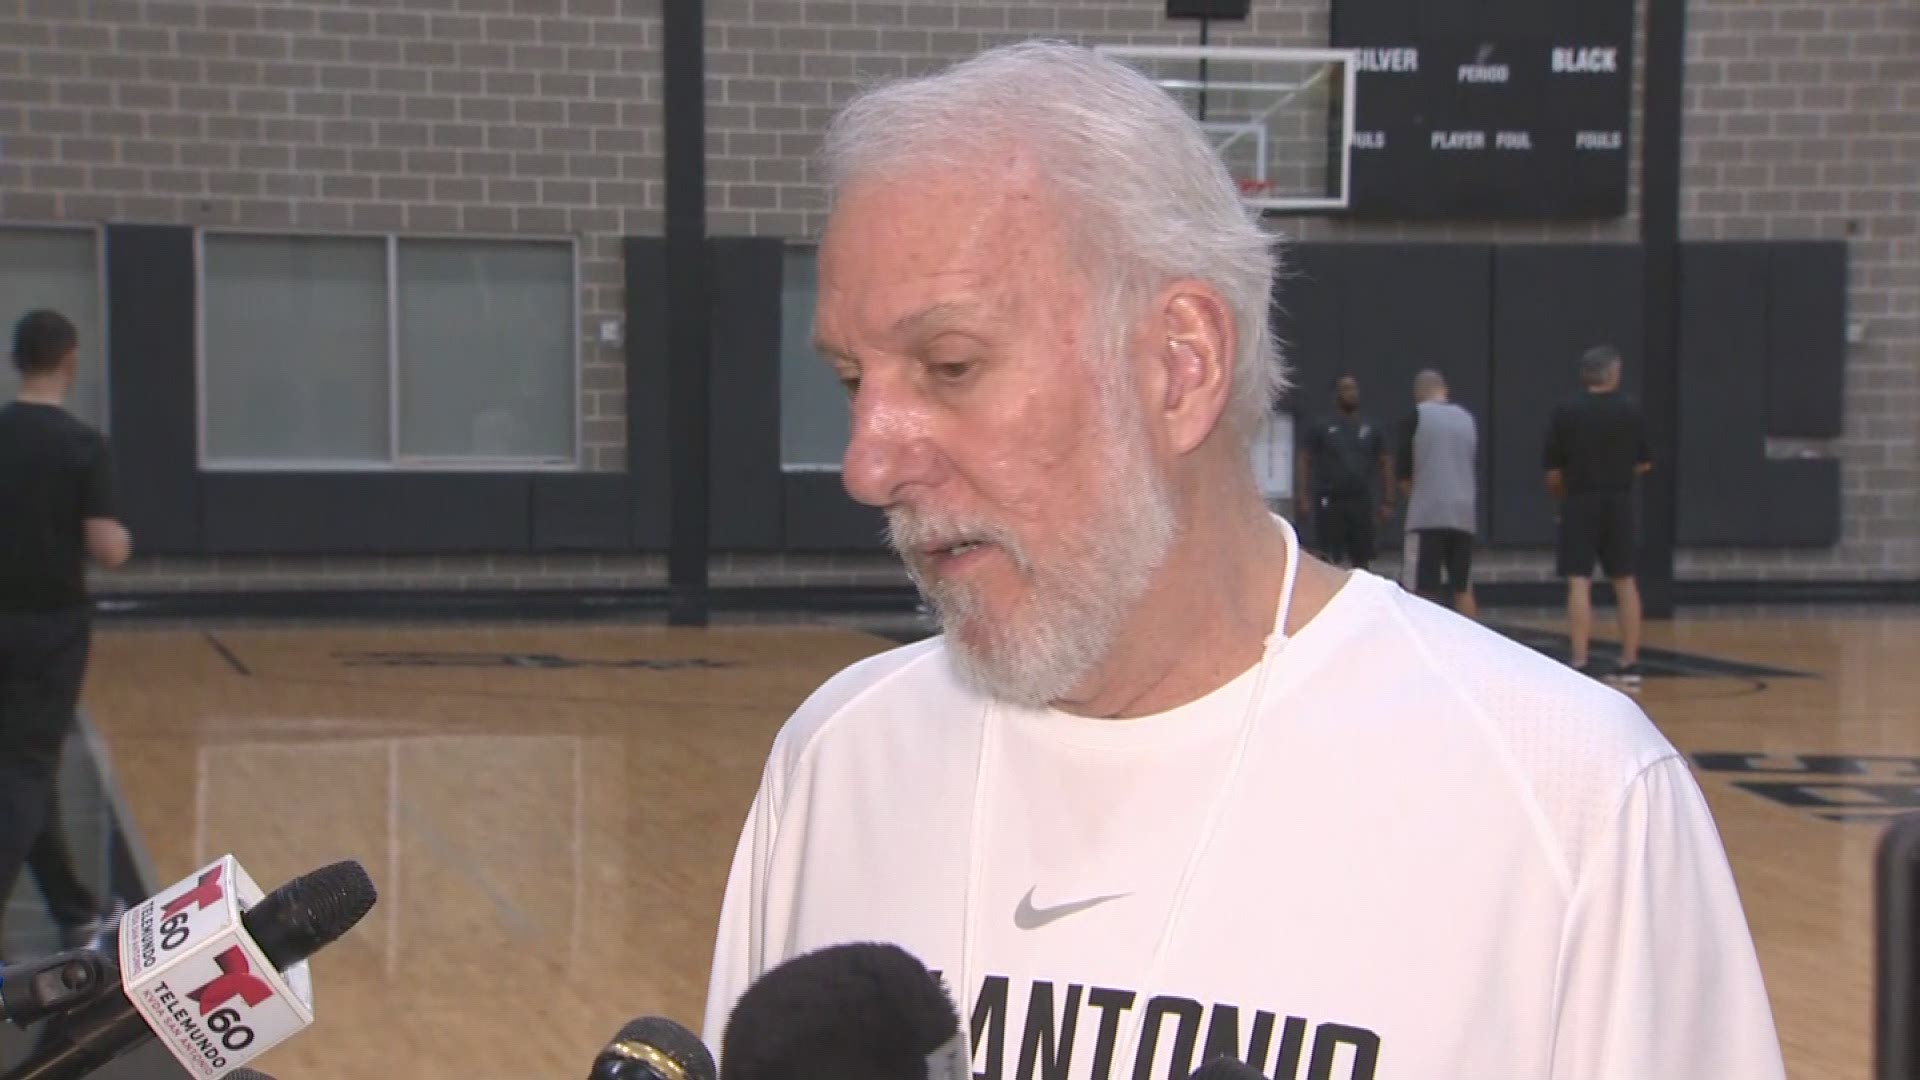 During a press conference, Spurs head coach Gregg Popovich said that Kawhi Leonard may not return from injury to play with the team this season.